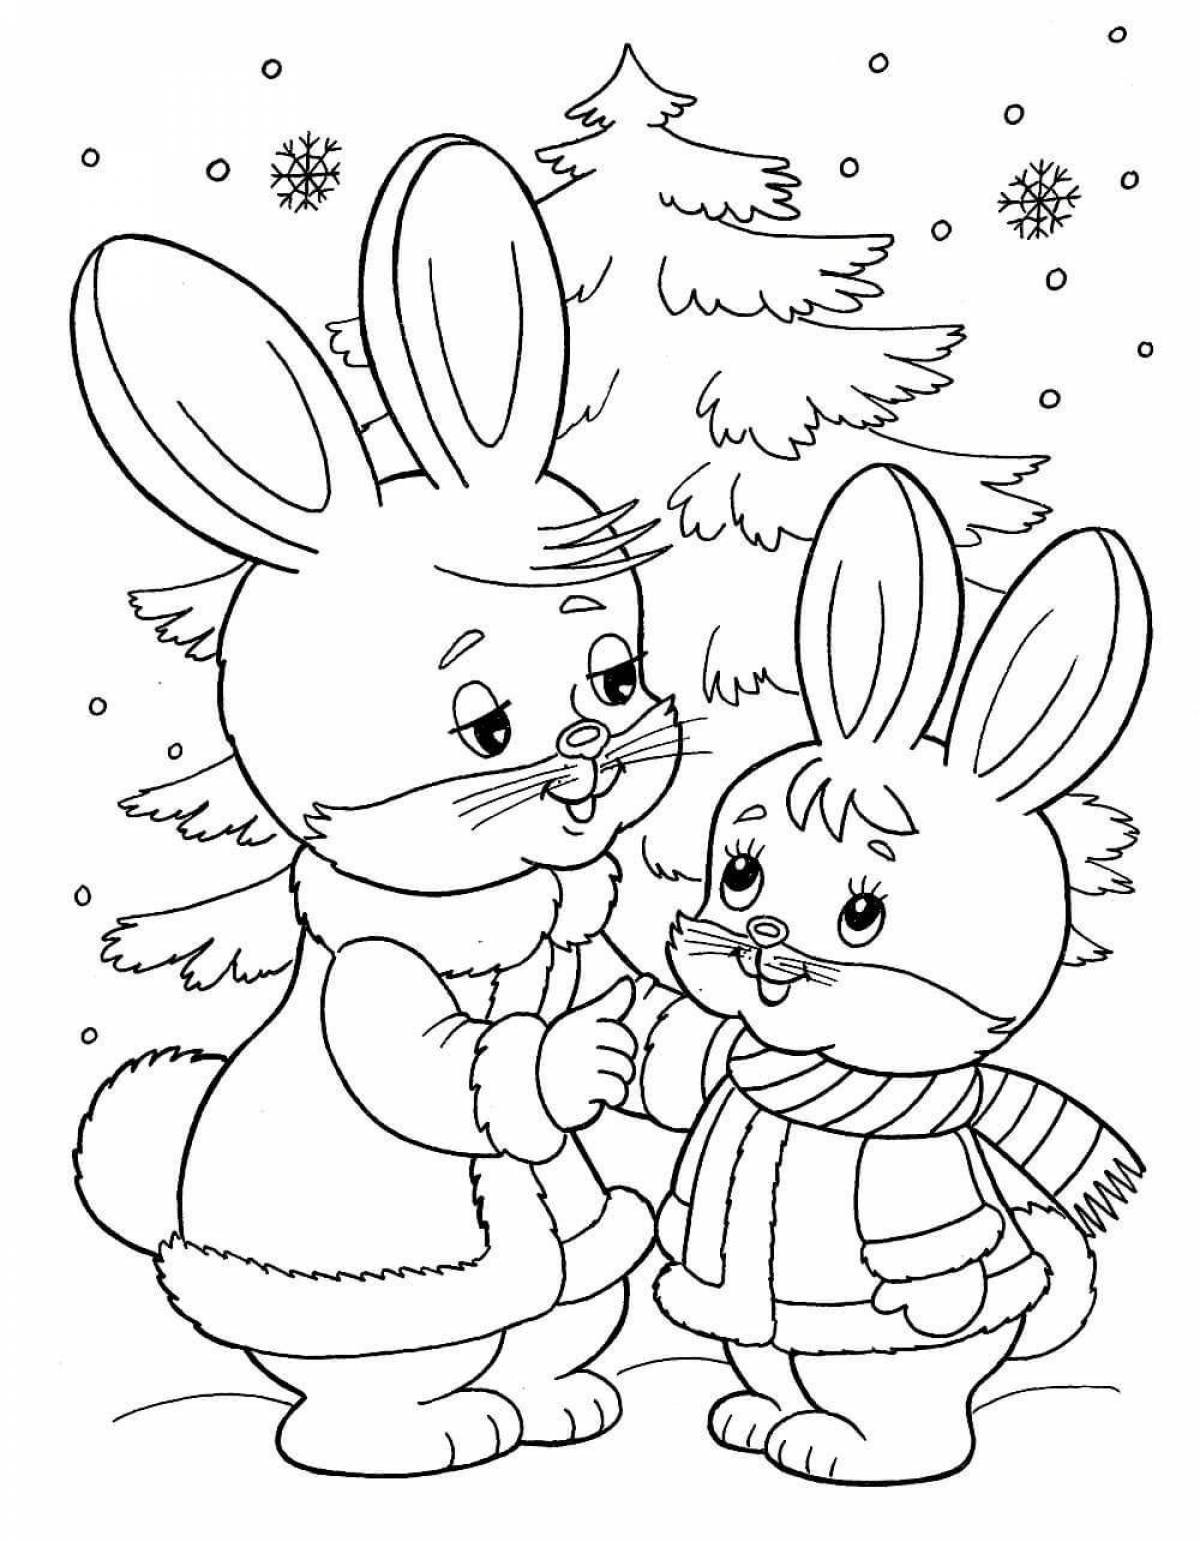 Animated winter coloring book for children 3-4 years old